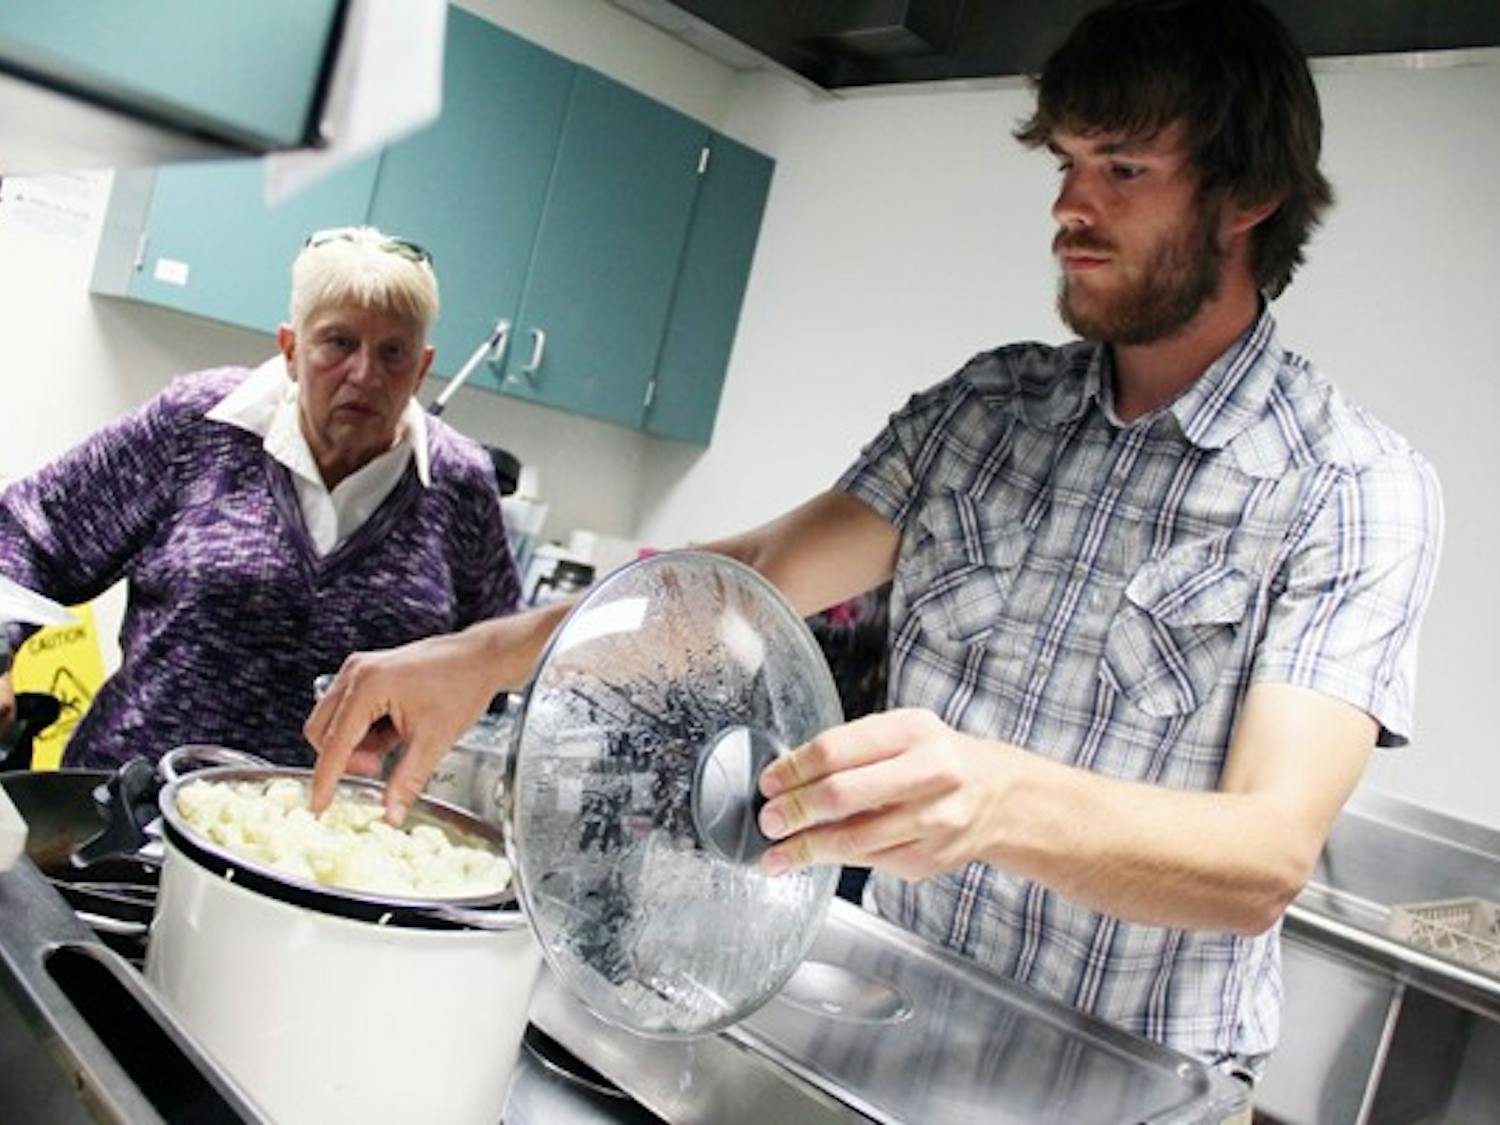 Food resource coordinator Neal Wepking teaches a free cooking class at the Escalante Community Center Monday night. (Photo by Diana Lustig)